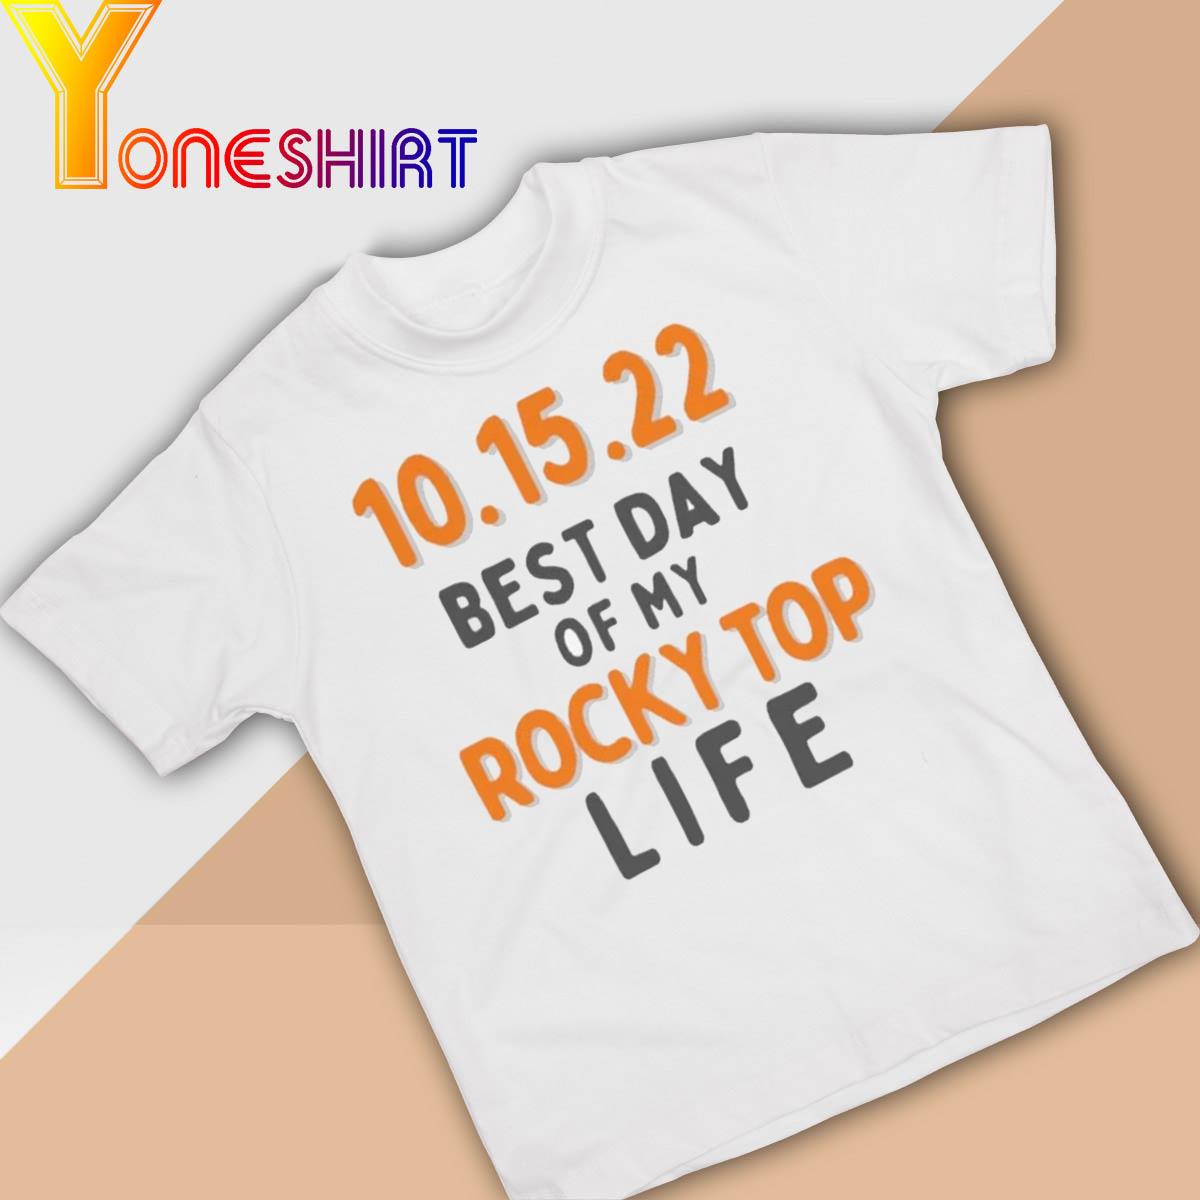 Tennessee Volunteers 10 15 22 Best day of my Rocky Top Life shirt